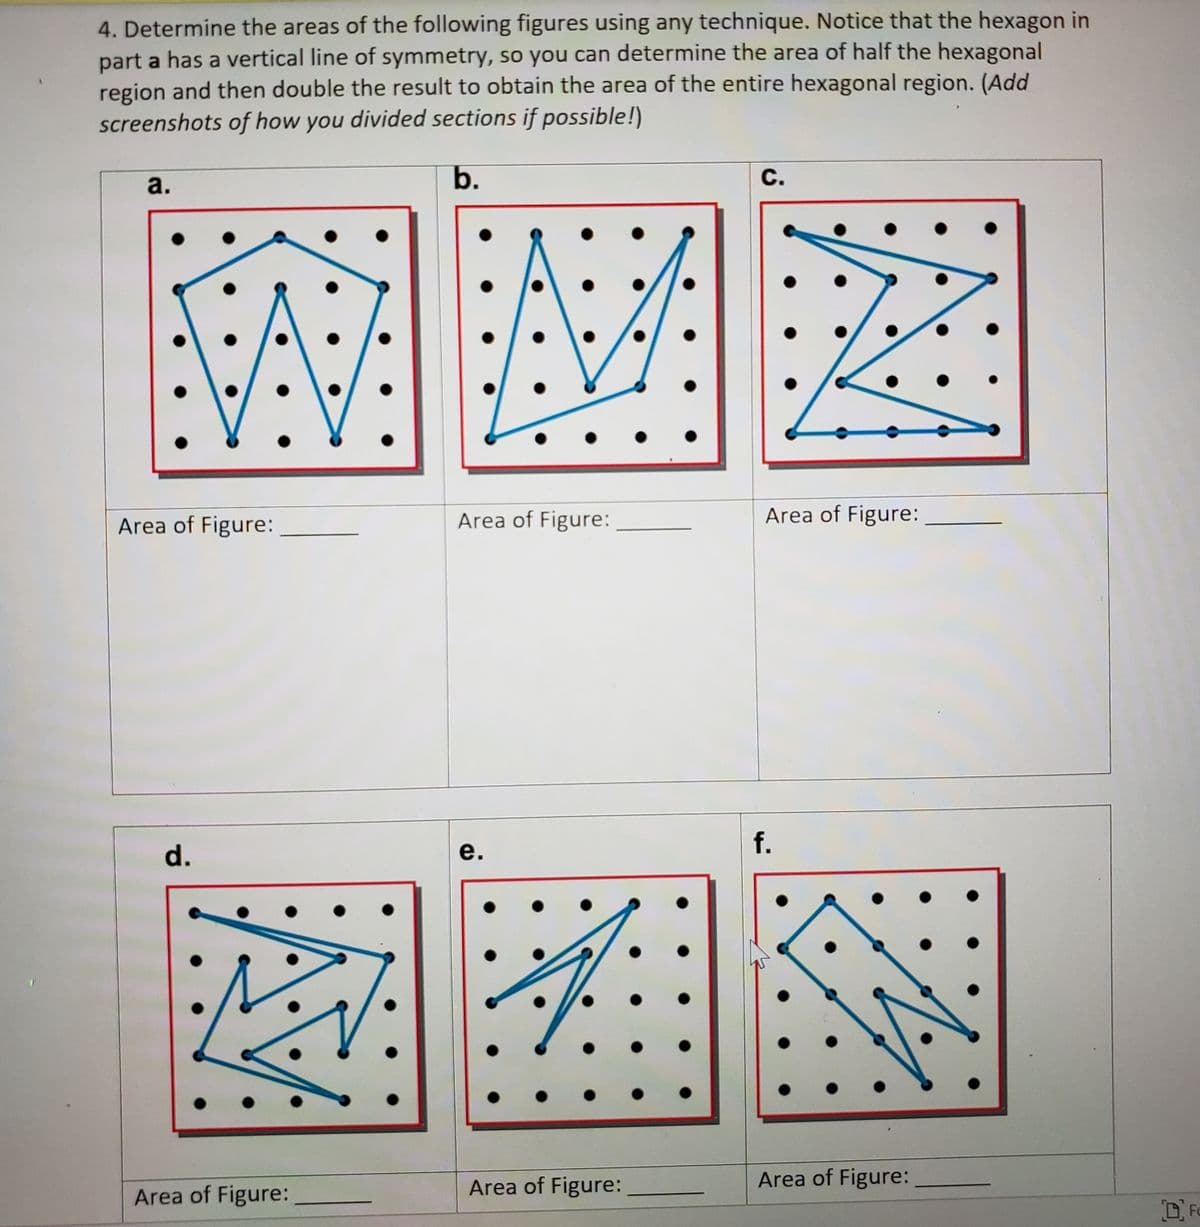 4. Determine the areas of the following figures using any technique. Notice that the hexagon in
part a has a vertical line of symmetry, so you can determine the area of half the hexagonal
region and then double the result to obtain the area of the entire hexagonal region. (Add
screenshots of how you divided sections if possible!)
a.
b.
с.
Area of Figure:
Area of Figure:
Area of Figure:
f.
d.
е.
Area of Figure:
Area of Figure:
Area of Figure:
D Fo
